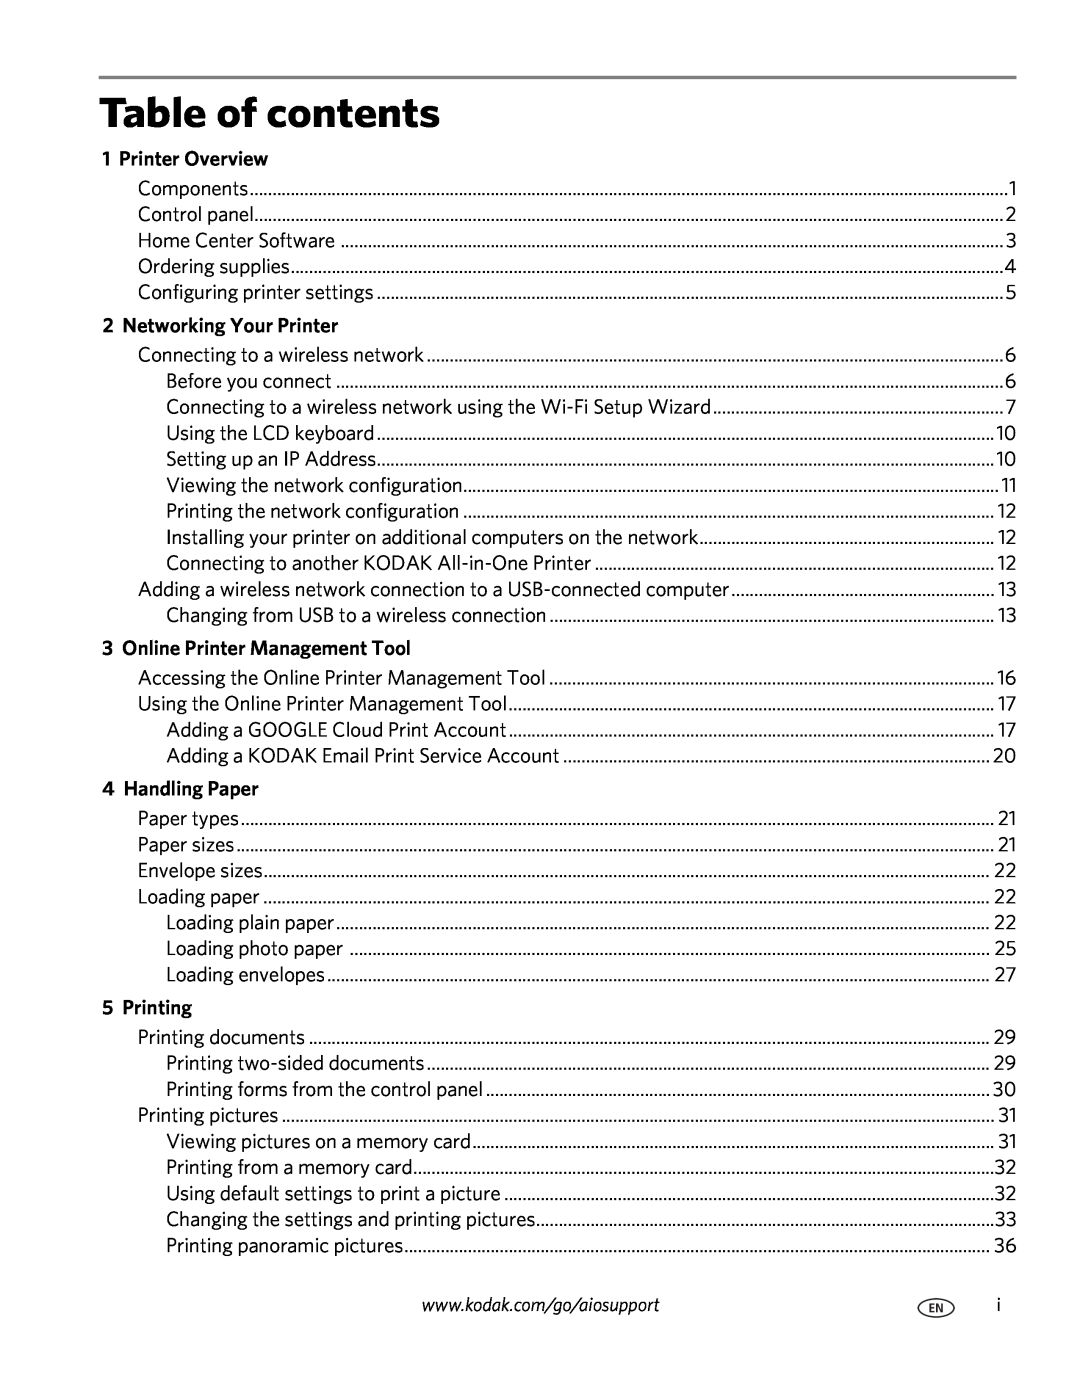 Kodak 3.1 Table of contents, Printer Overview, Networking Your Printer, Online Printer Management Tool, Handling Paper 